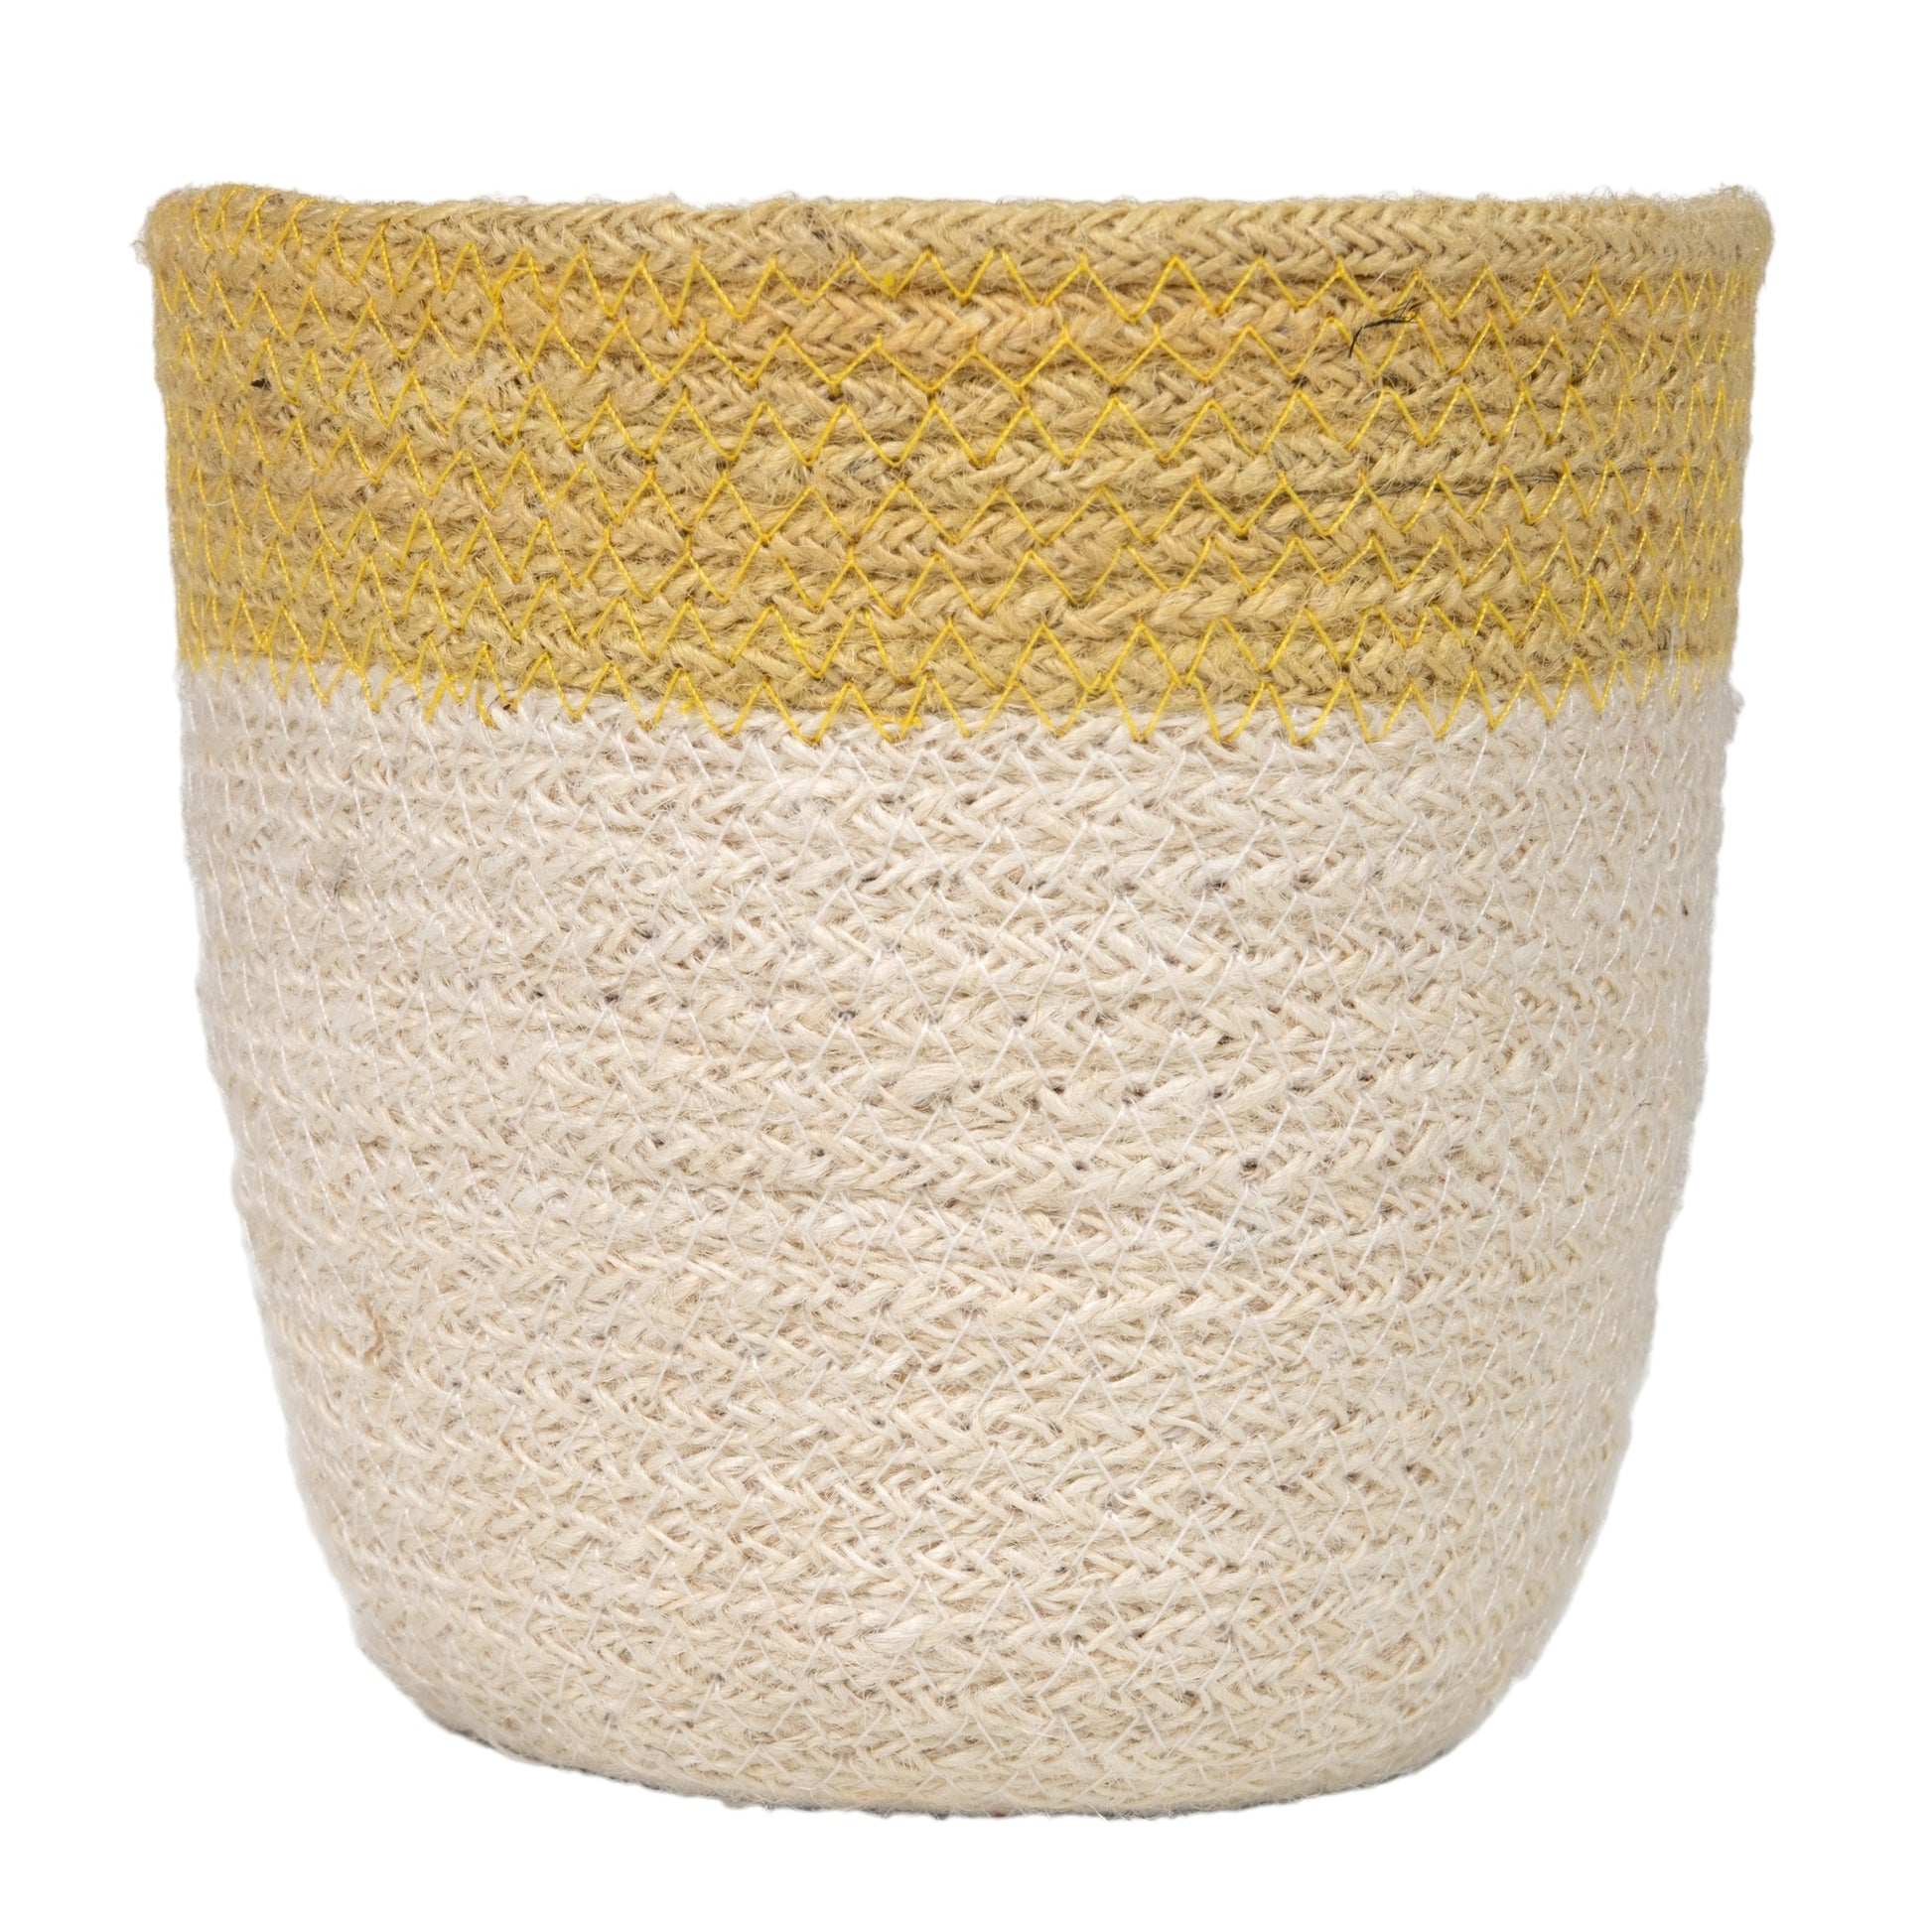 Jute woven basket in white with yellow trim 